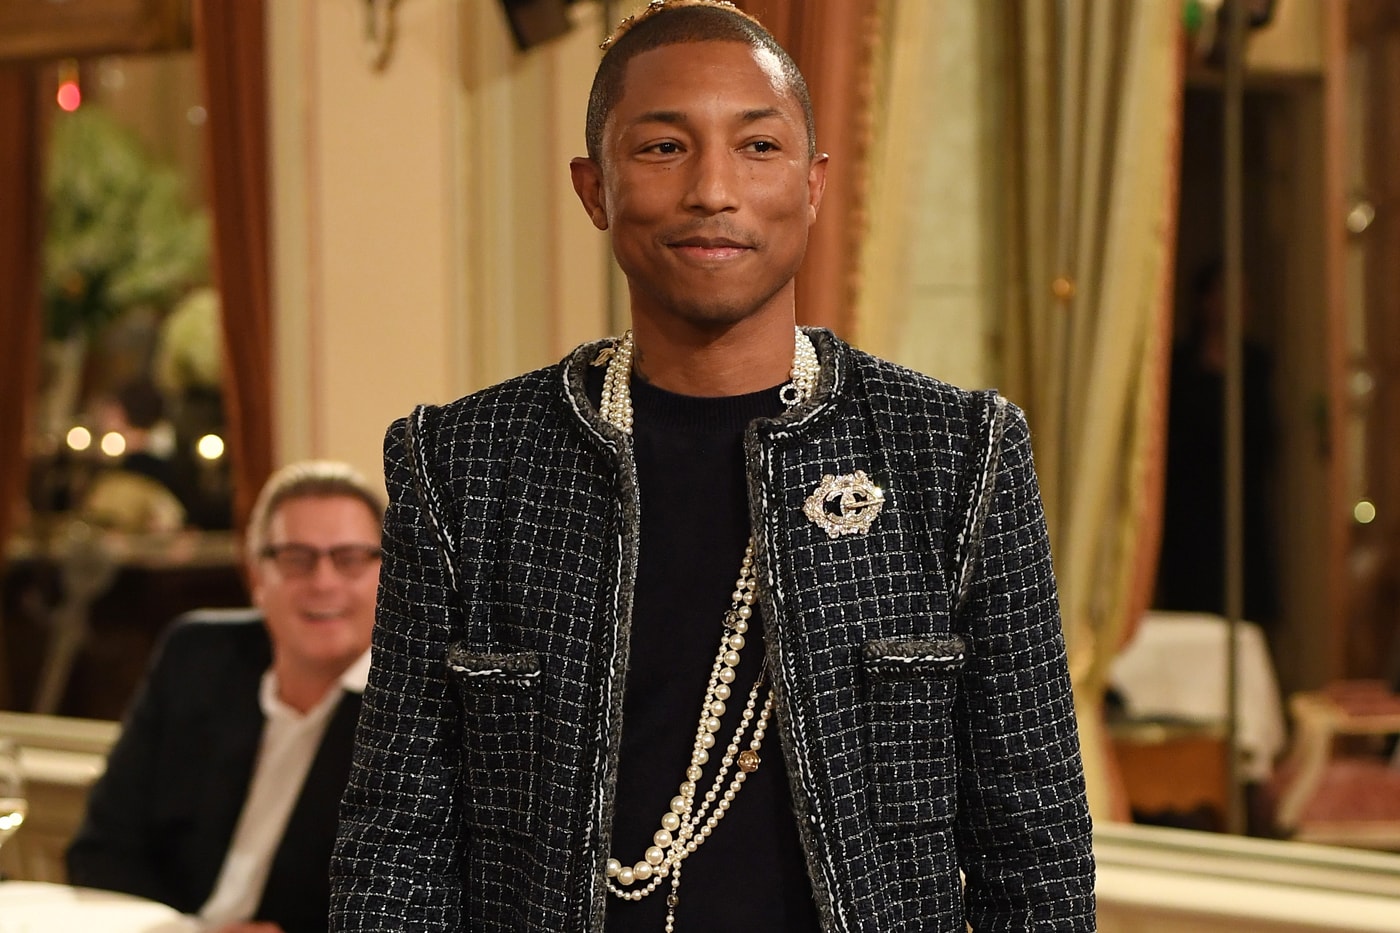 Pharrell & Chanel Team Up For Fashion Collaboration